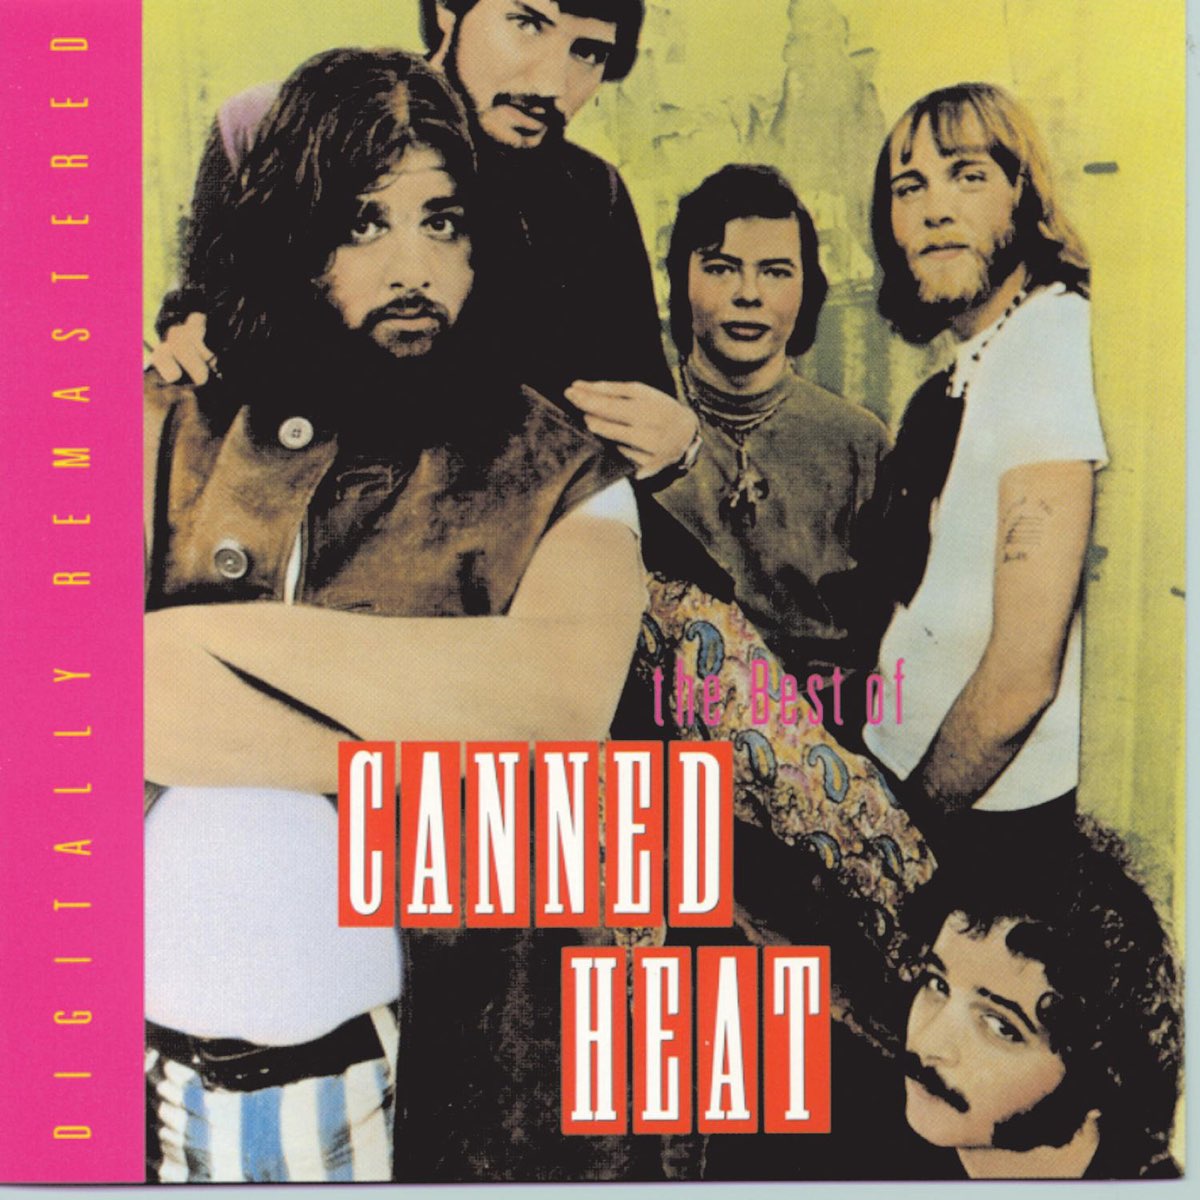 Canned heat steam фото 118